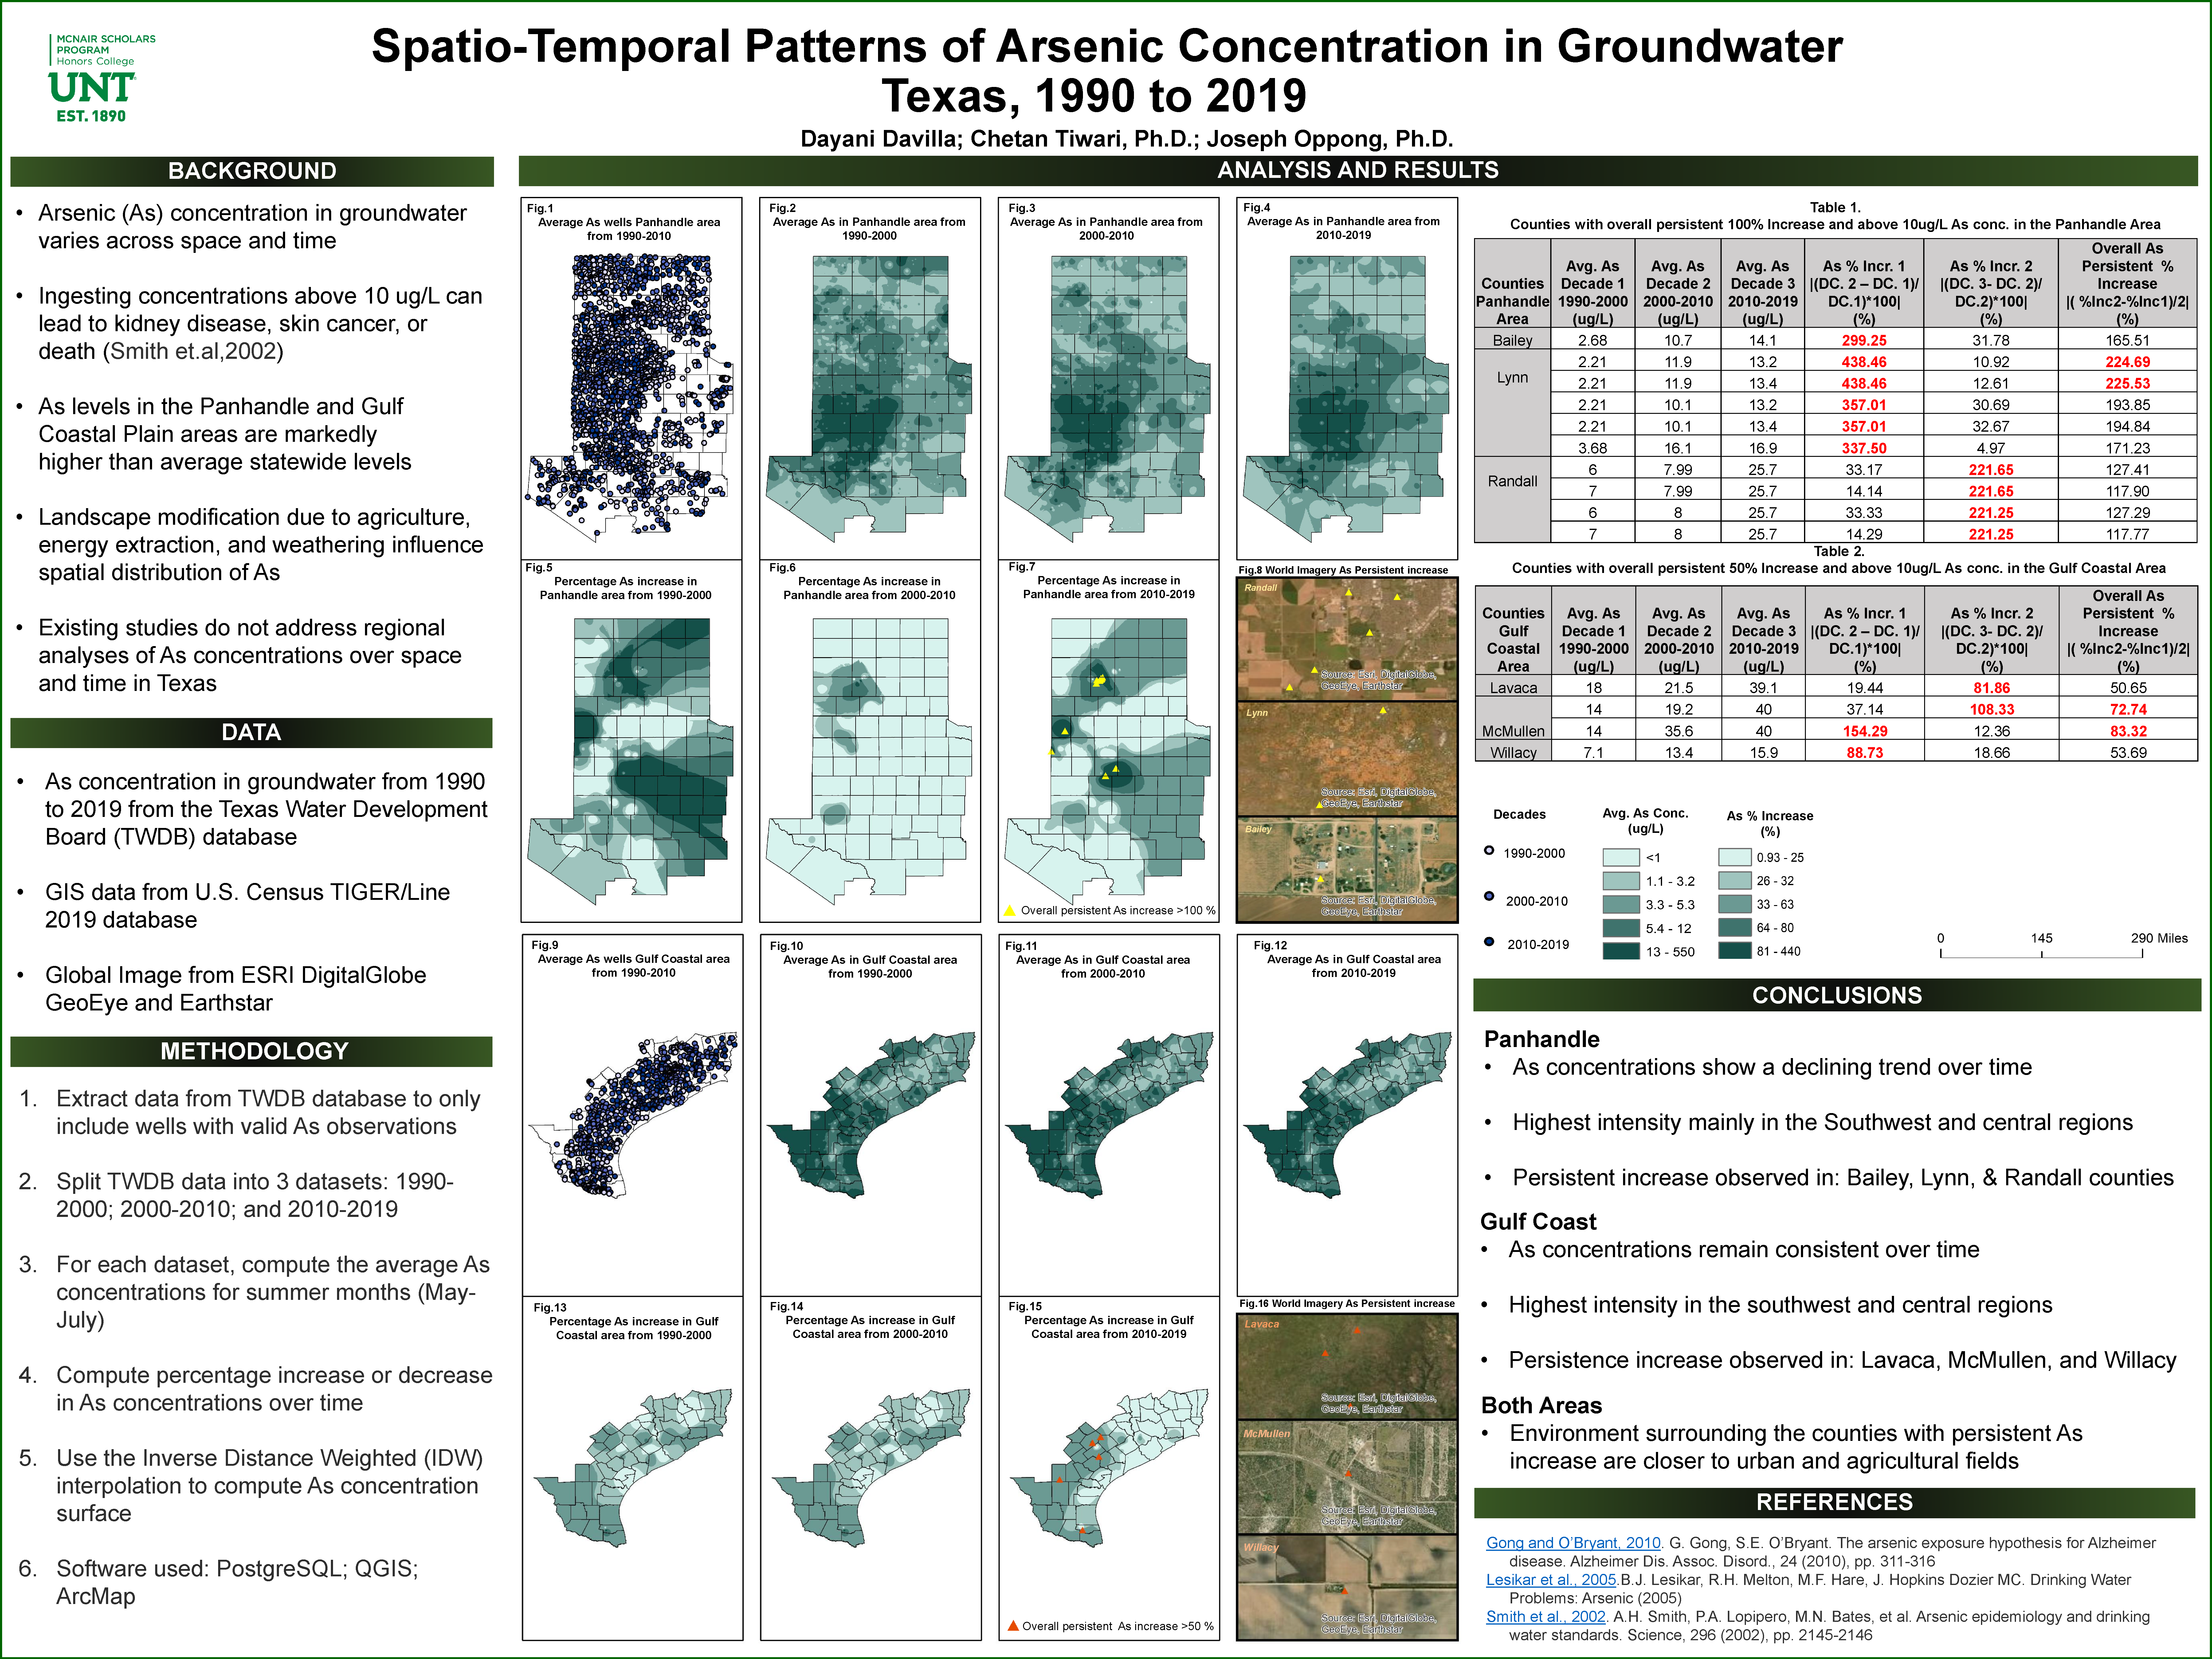 Spatio-Temporal Patterns of Arsenic Concentration in Groundwater Texas, 1990 to 2019